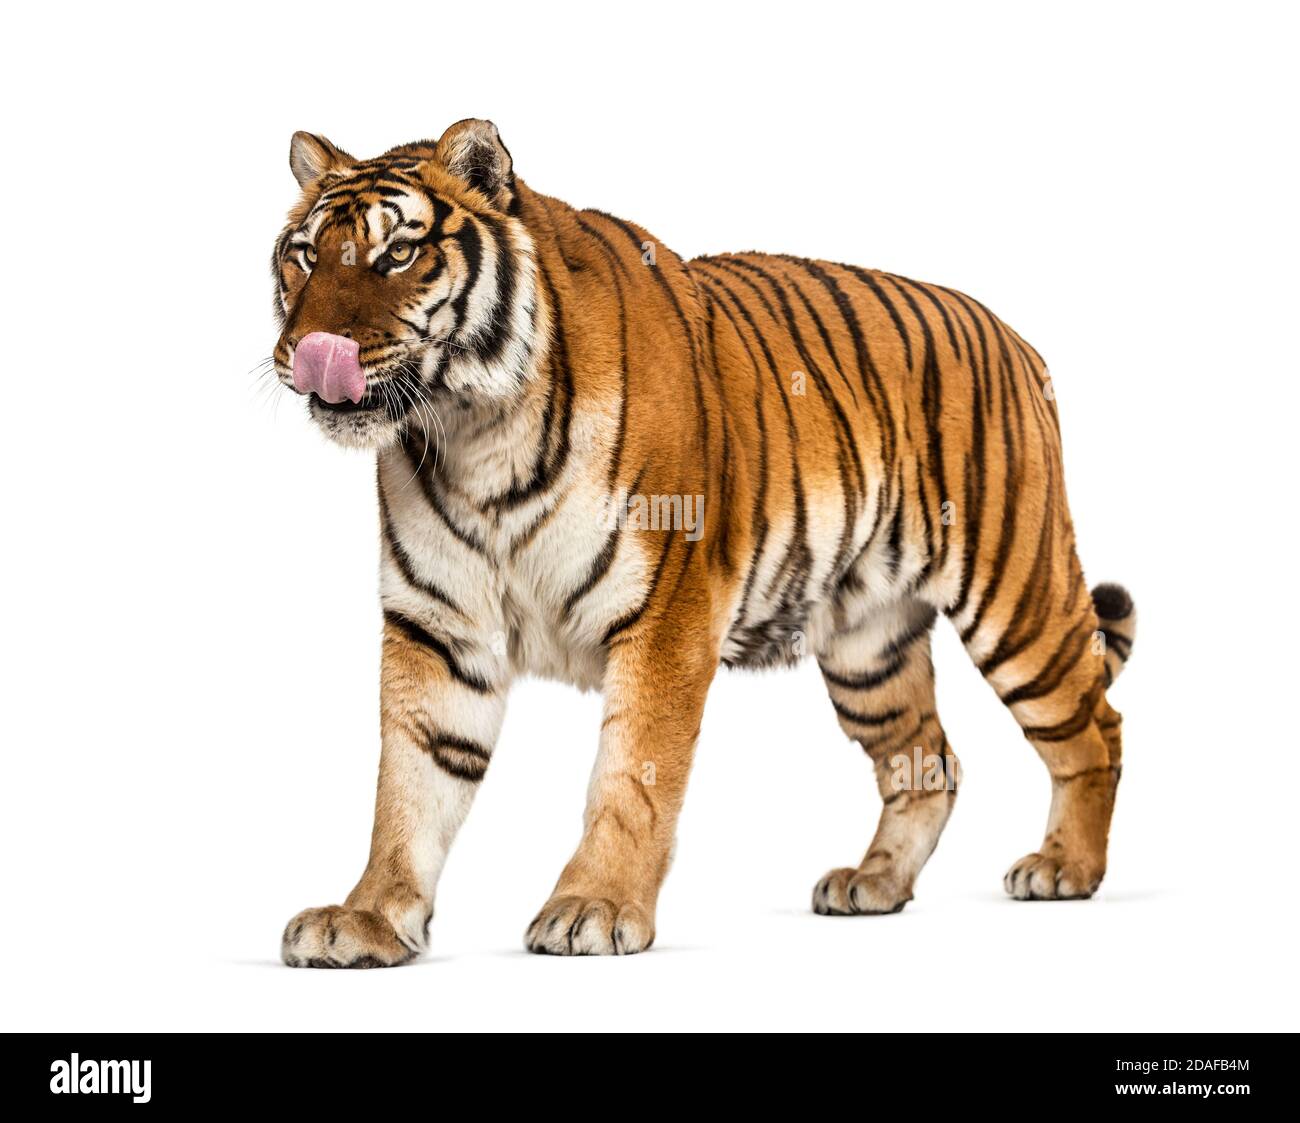 Tiger licking itself, looking hungry, isolated Stock Photo